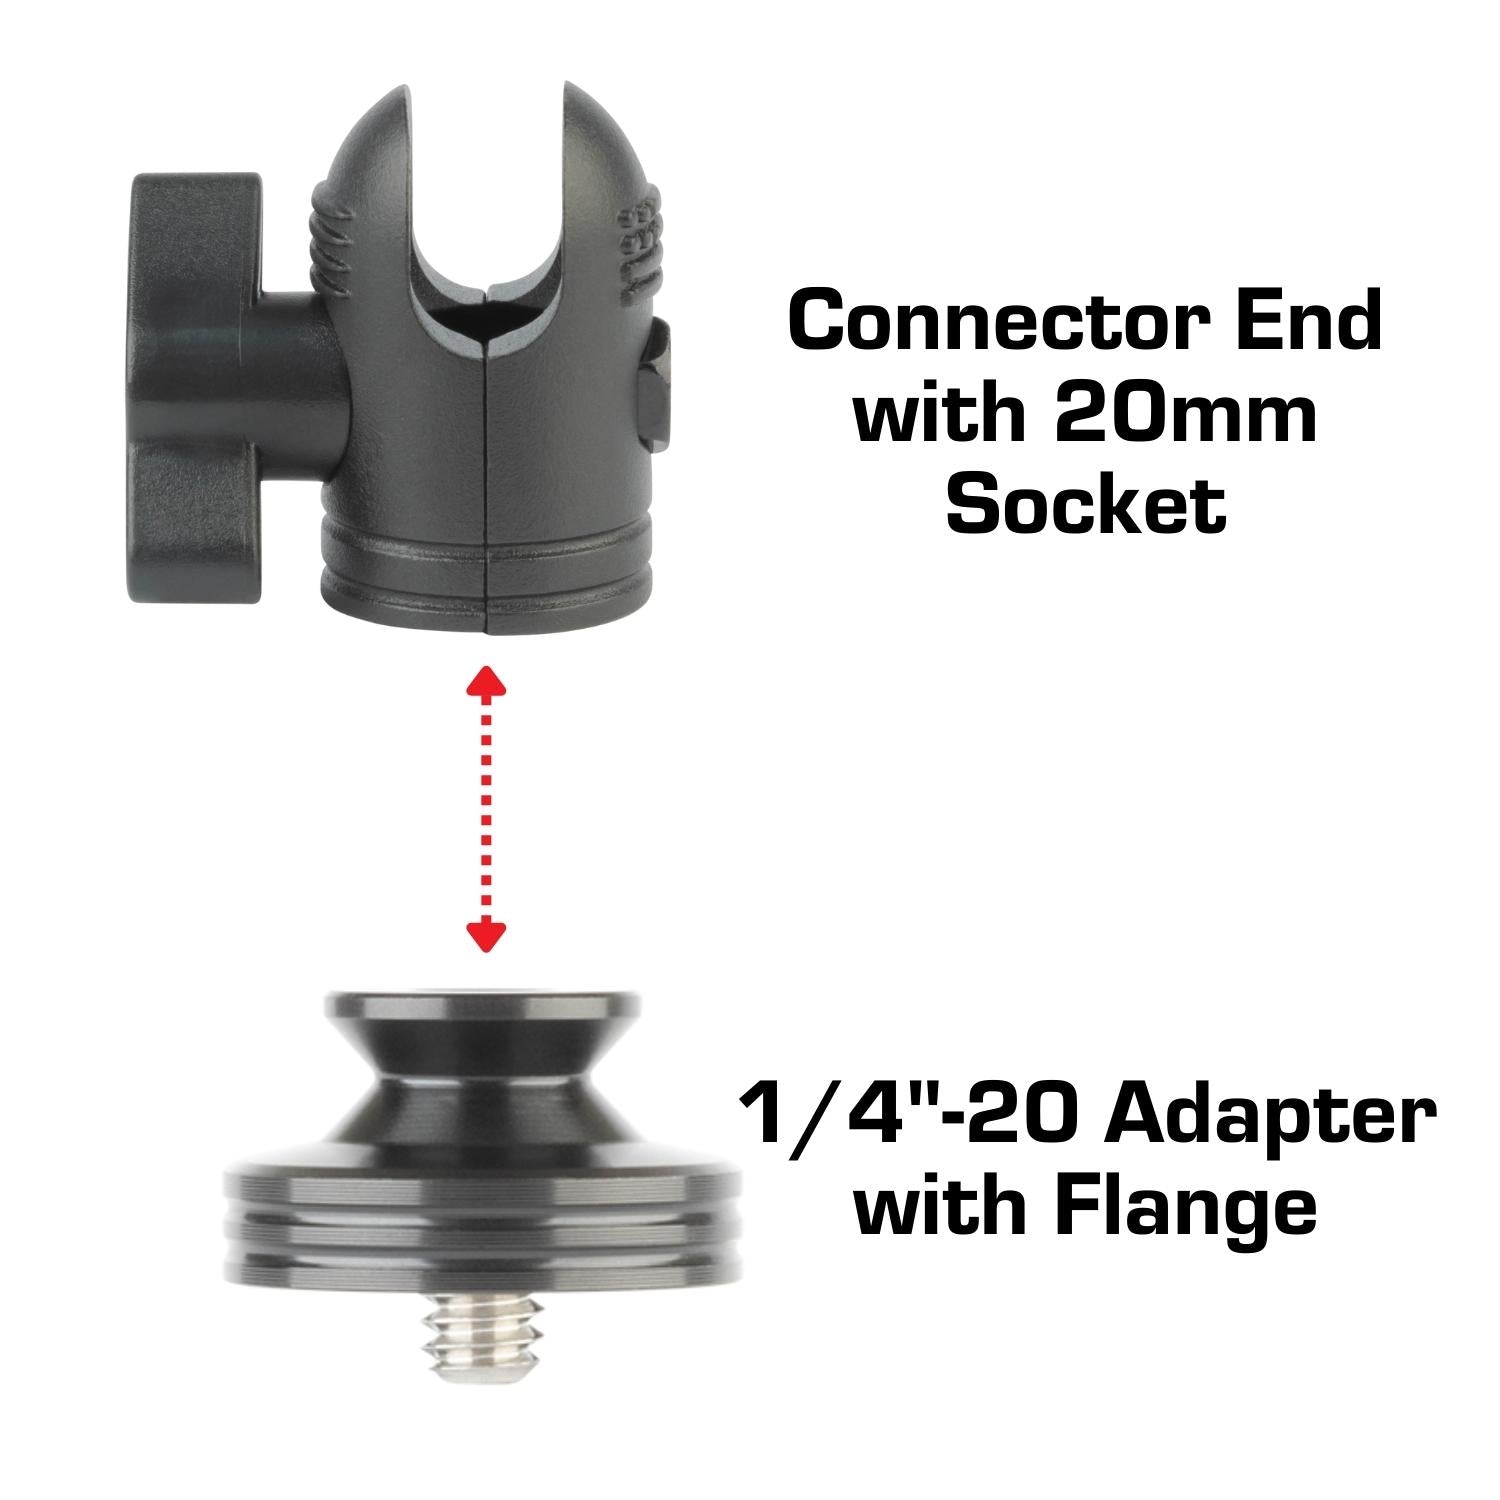 1/4"-20 Aluminum Camera Adapter with 20mm Connector End Stubby Edition